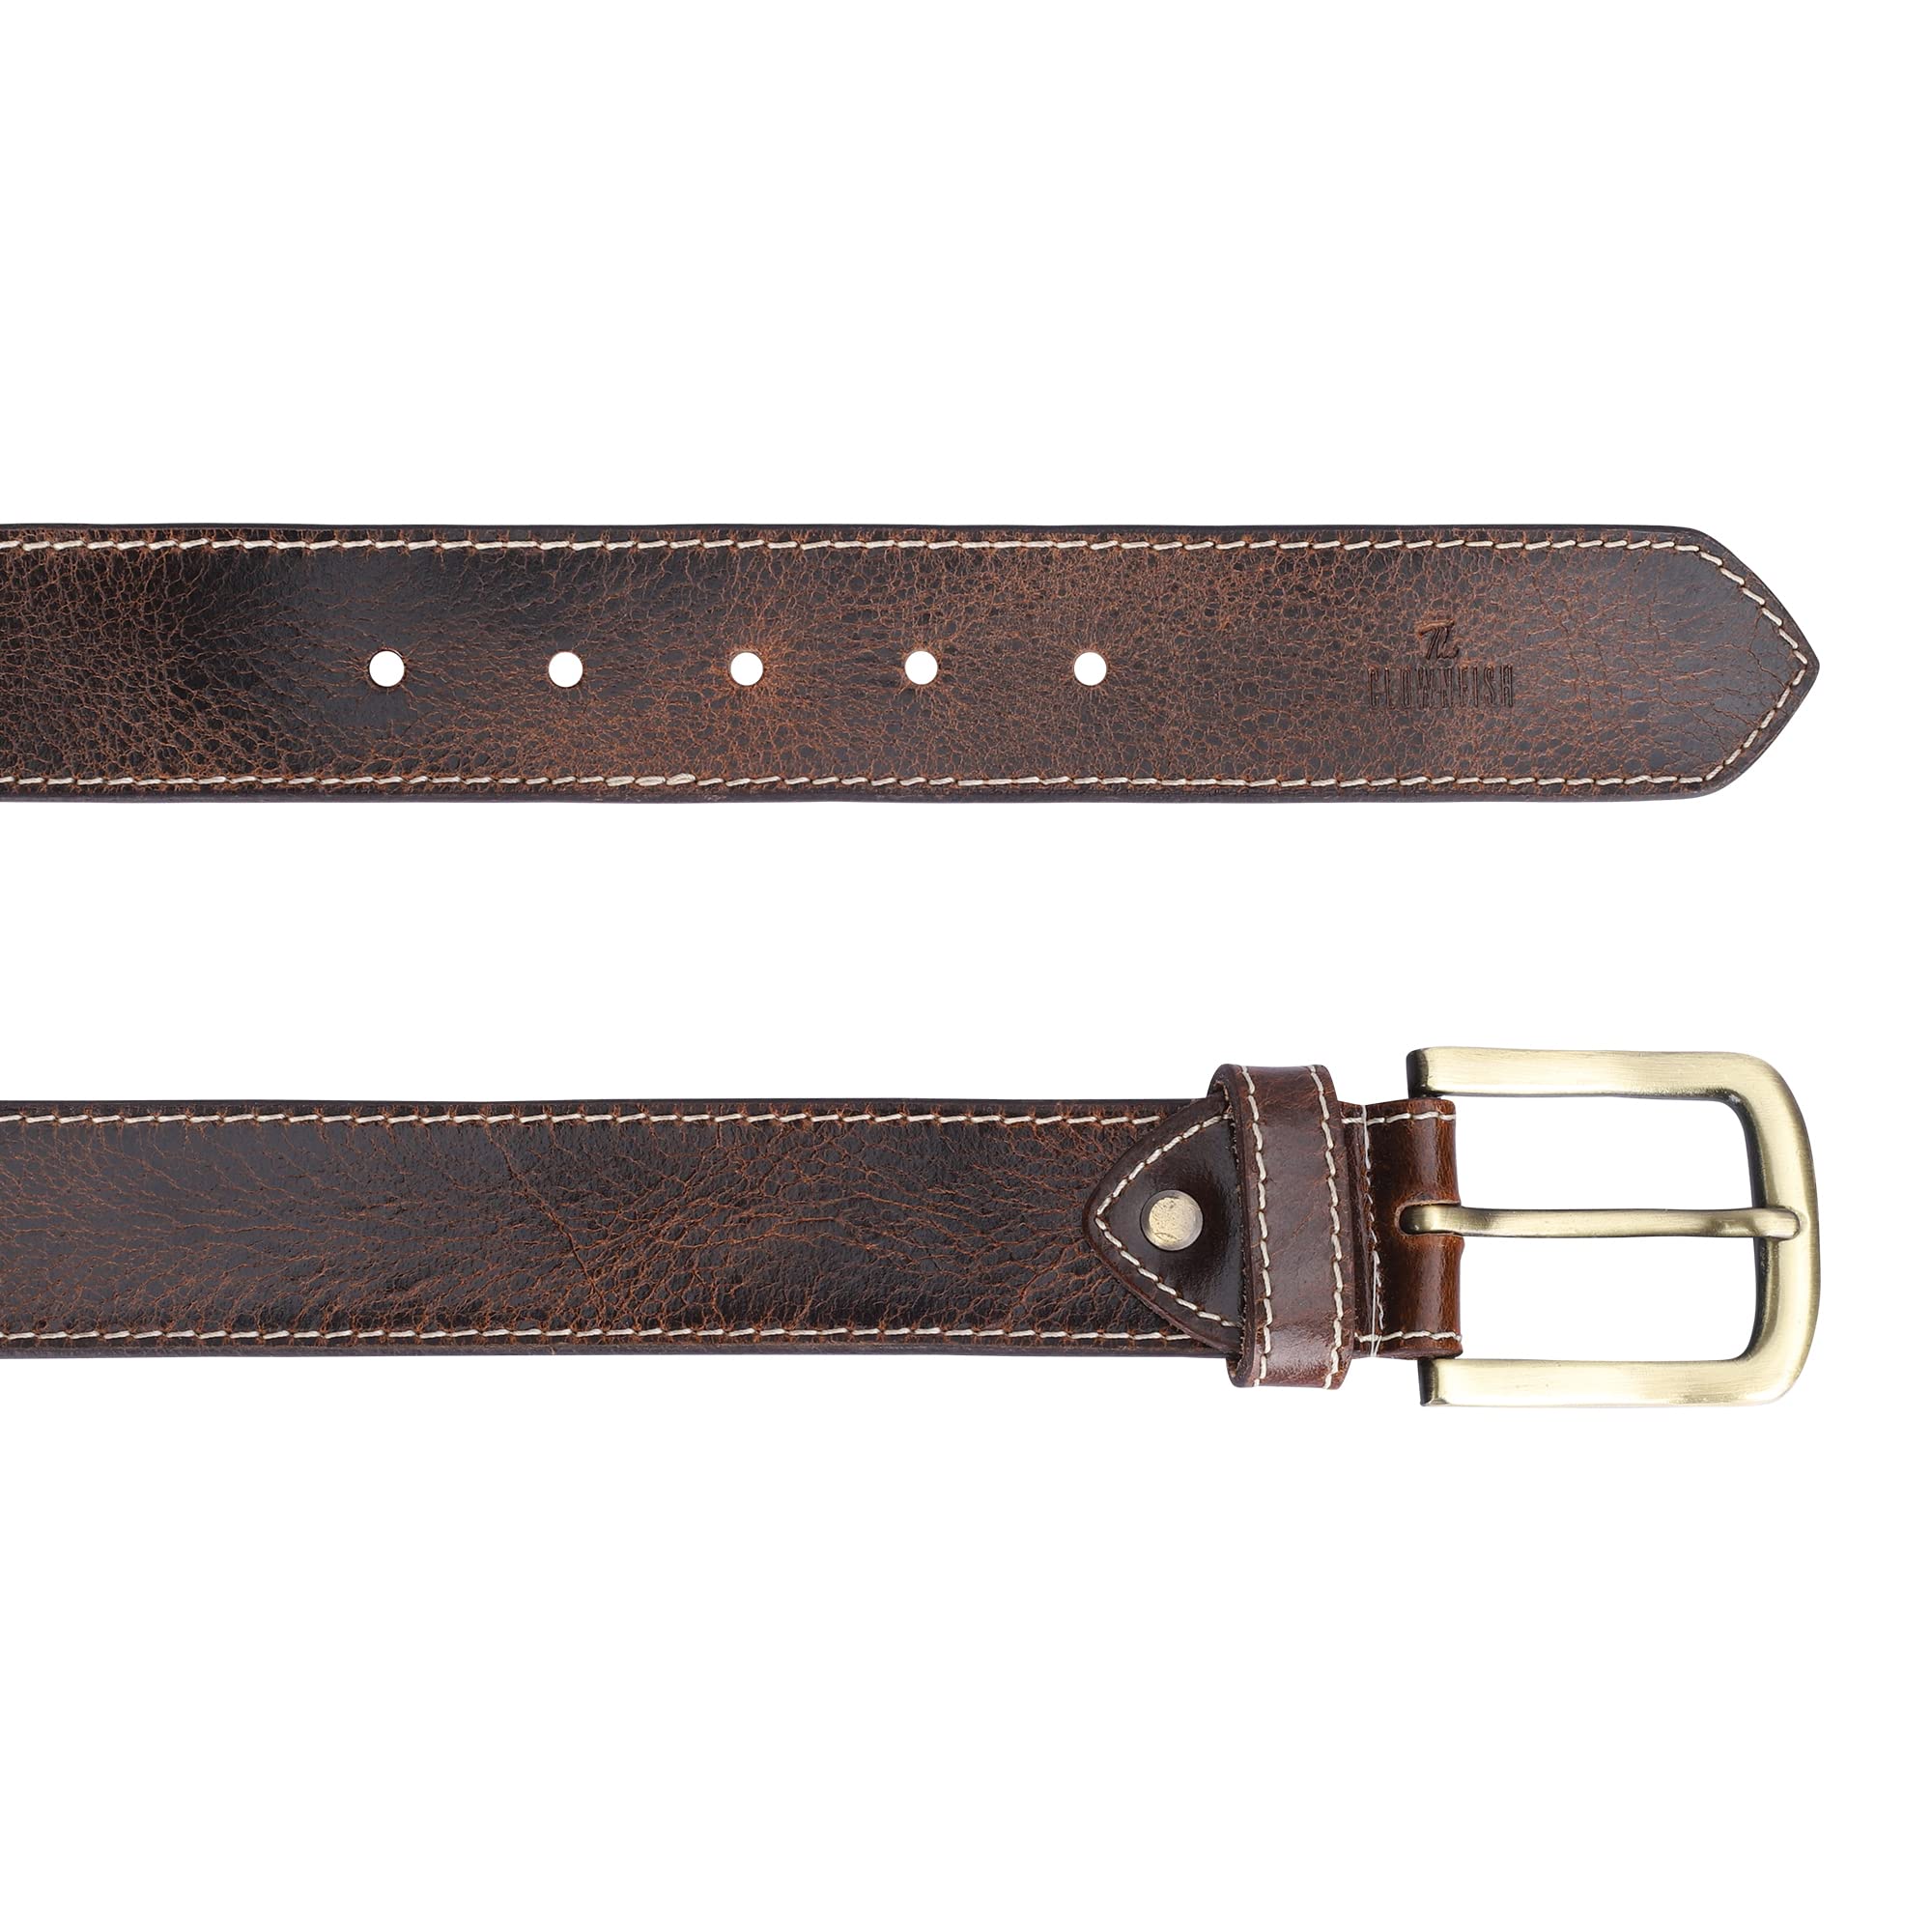 THE CLOWNFISH Men's Genuine Leather Belts - Brown (Size-32 inches)